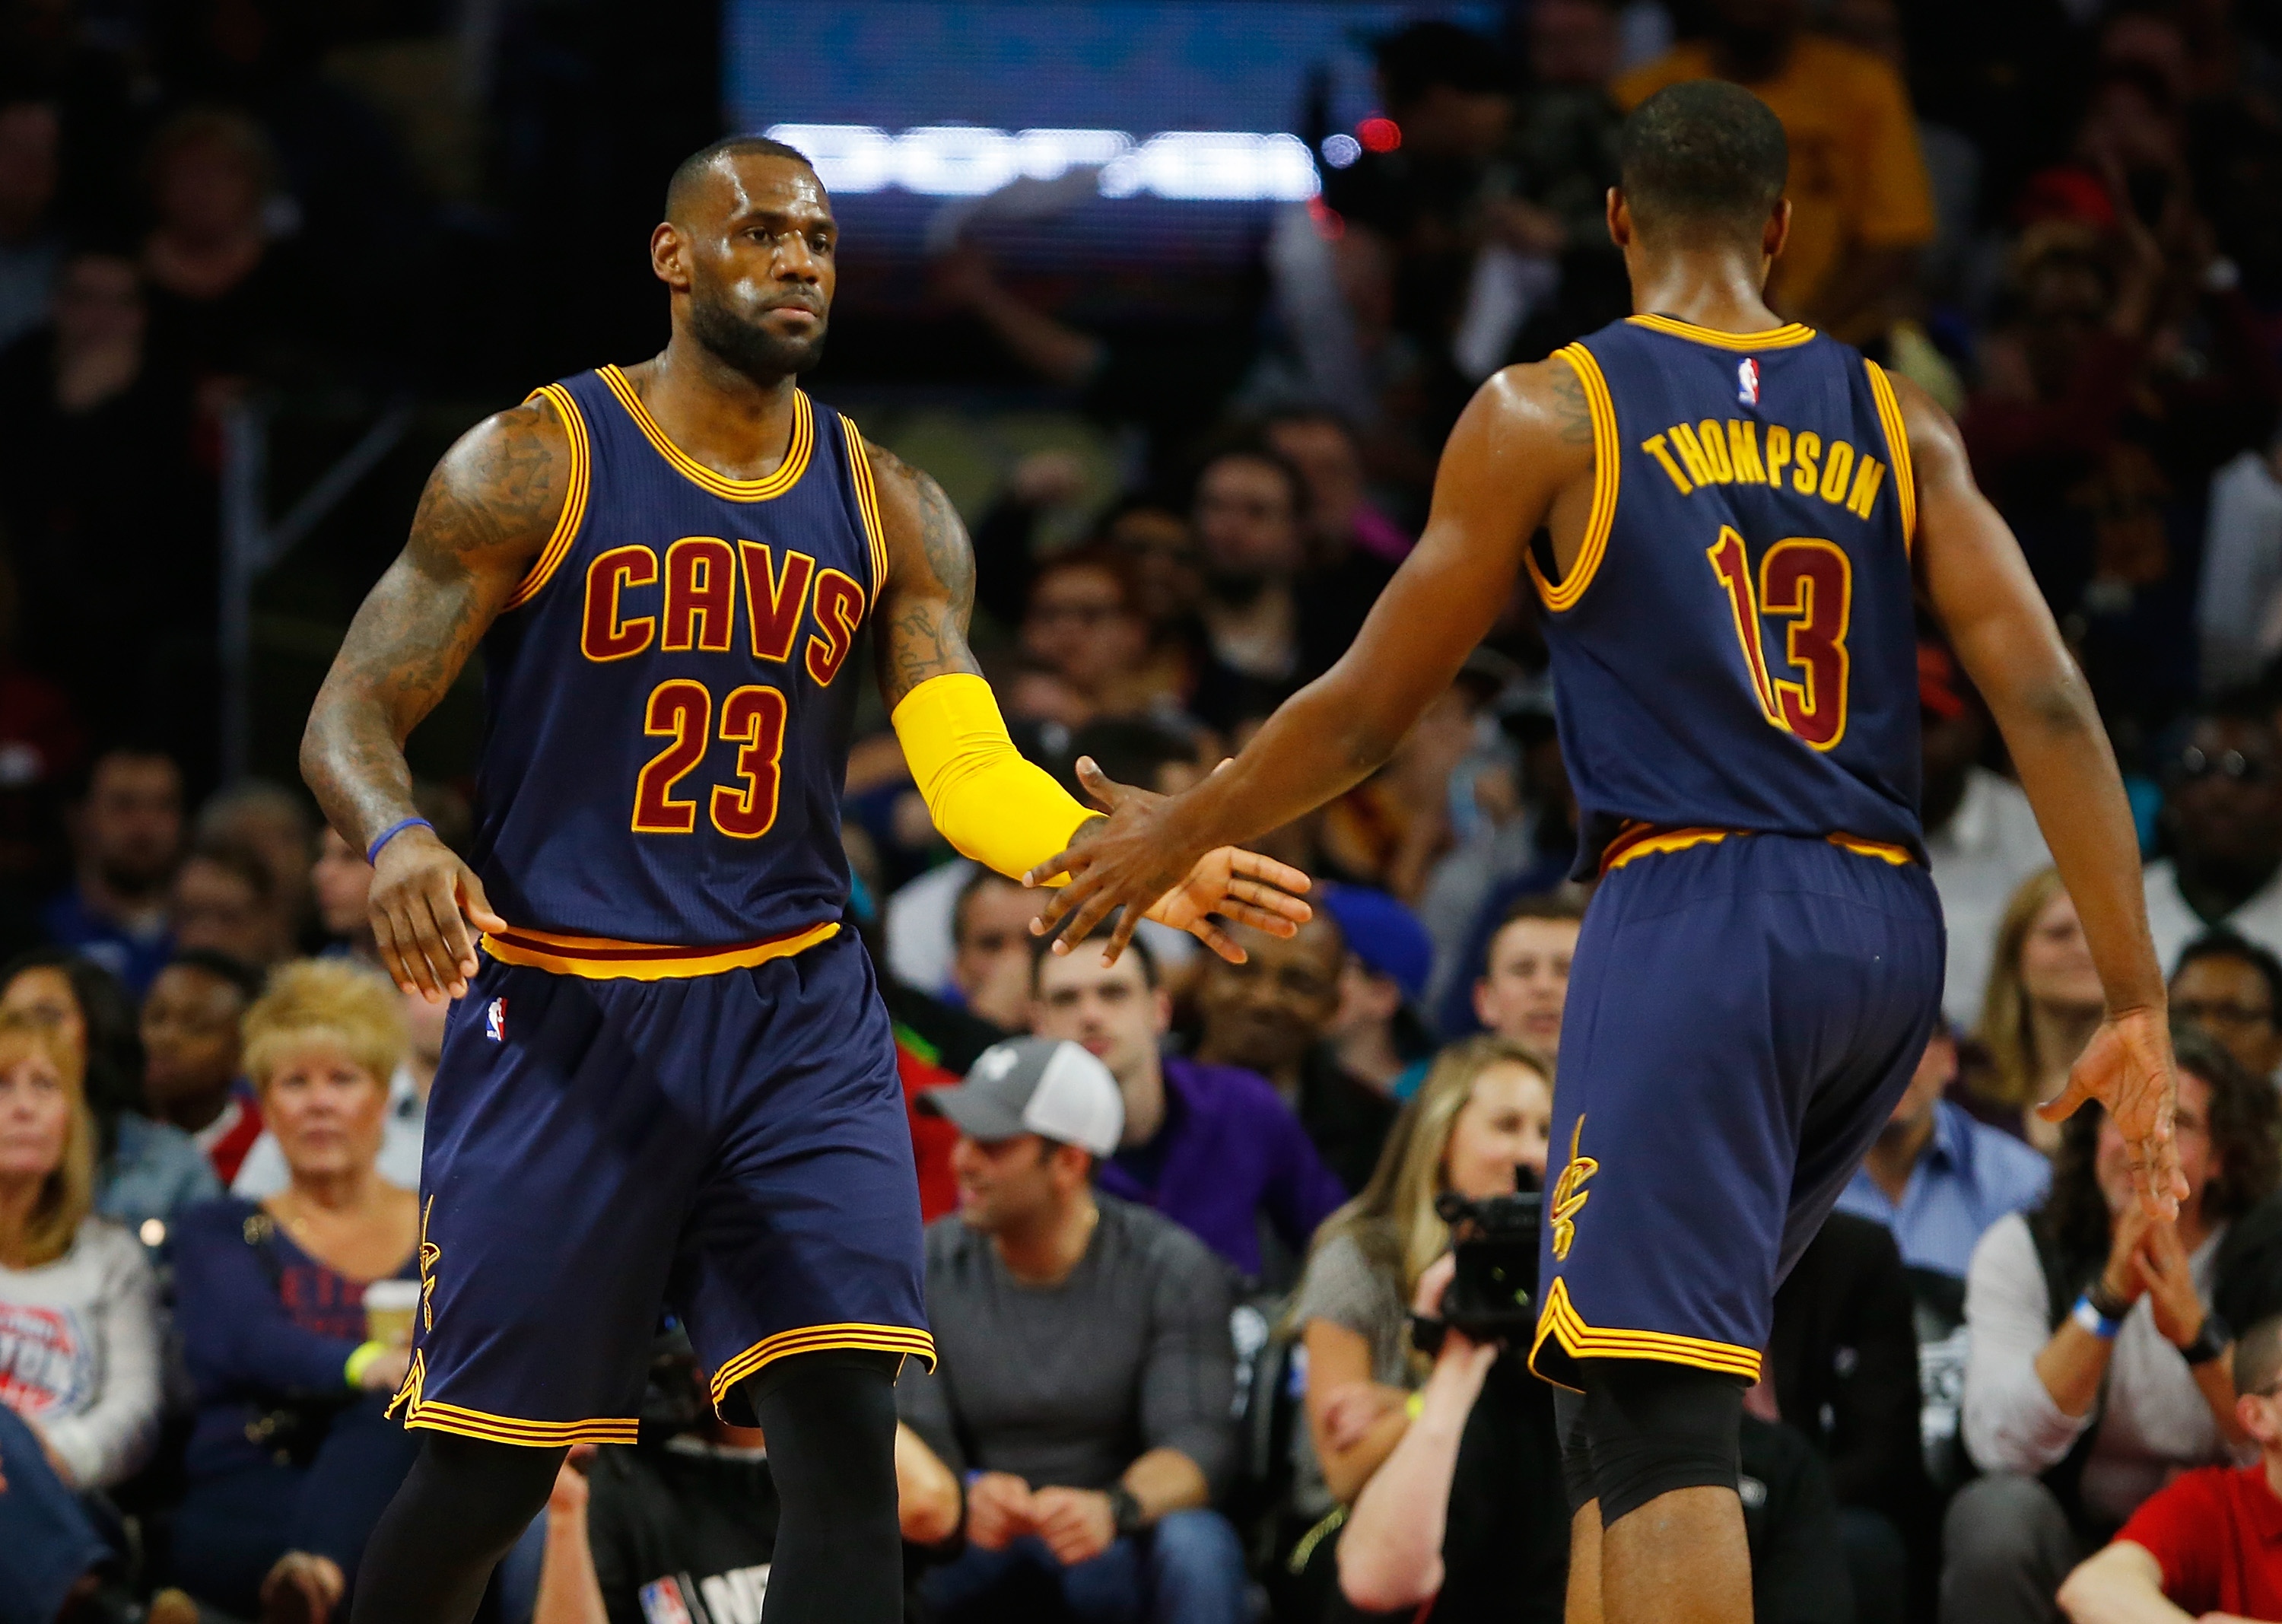 Tristan Thompson congratulates LeBron James on making the trades. (Gregory Shamus/Getty Images)